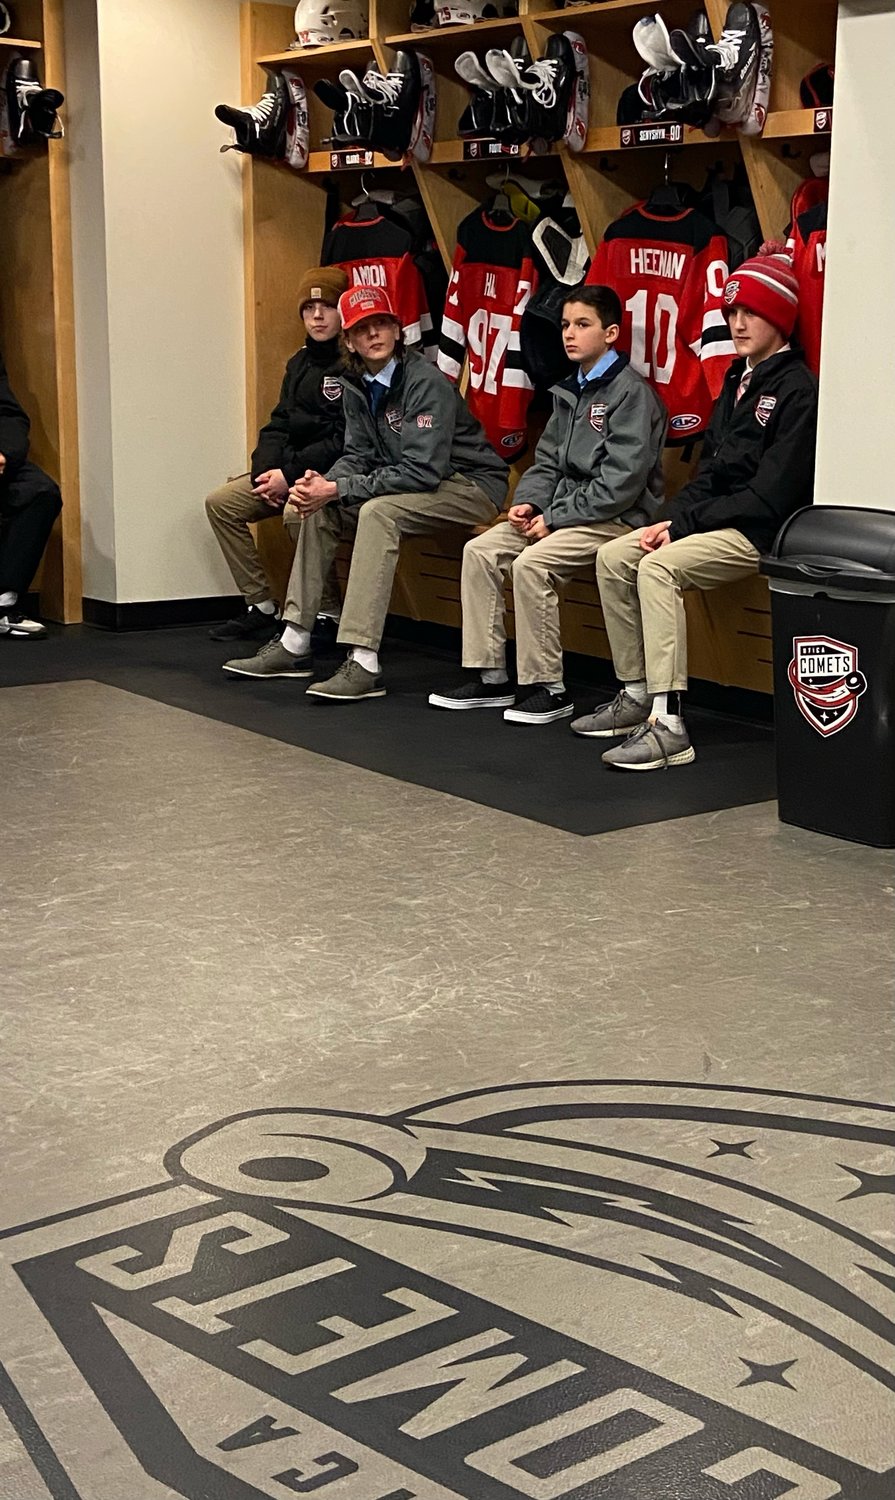 Utica Junior Comets players each got a spot in one of the lockers of a Utica Comets player during a short send-off event for the youth team. The squad is playing in a well-known tournament in Quebec.